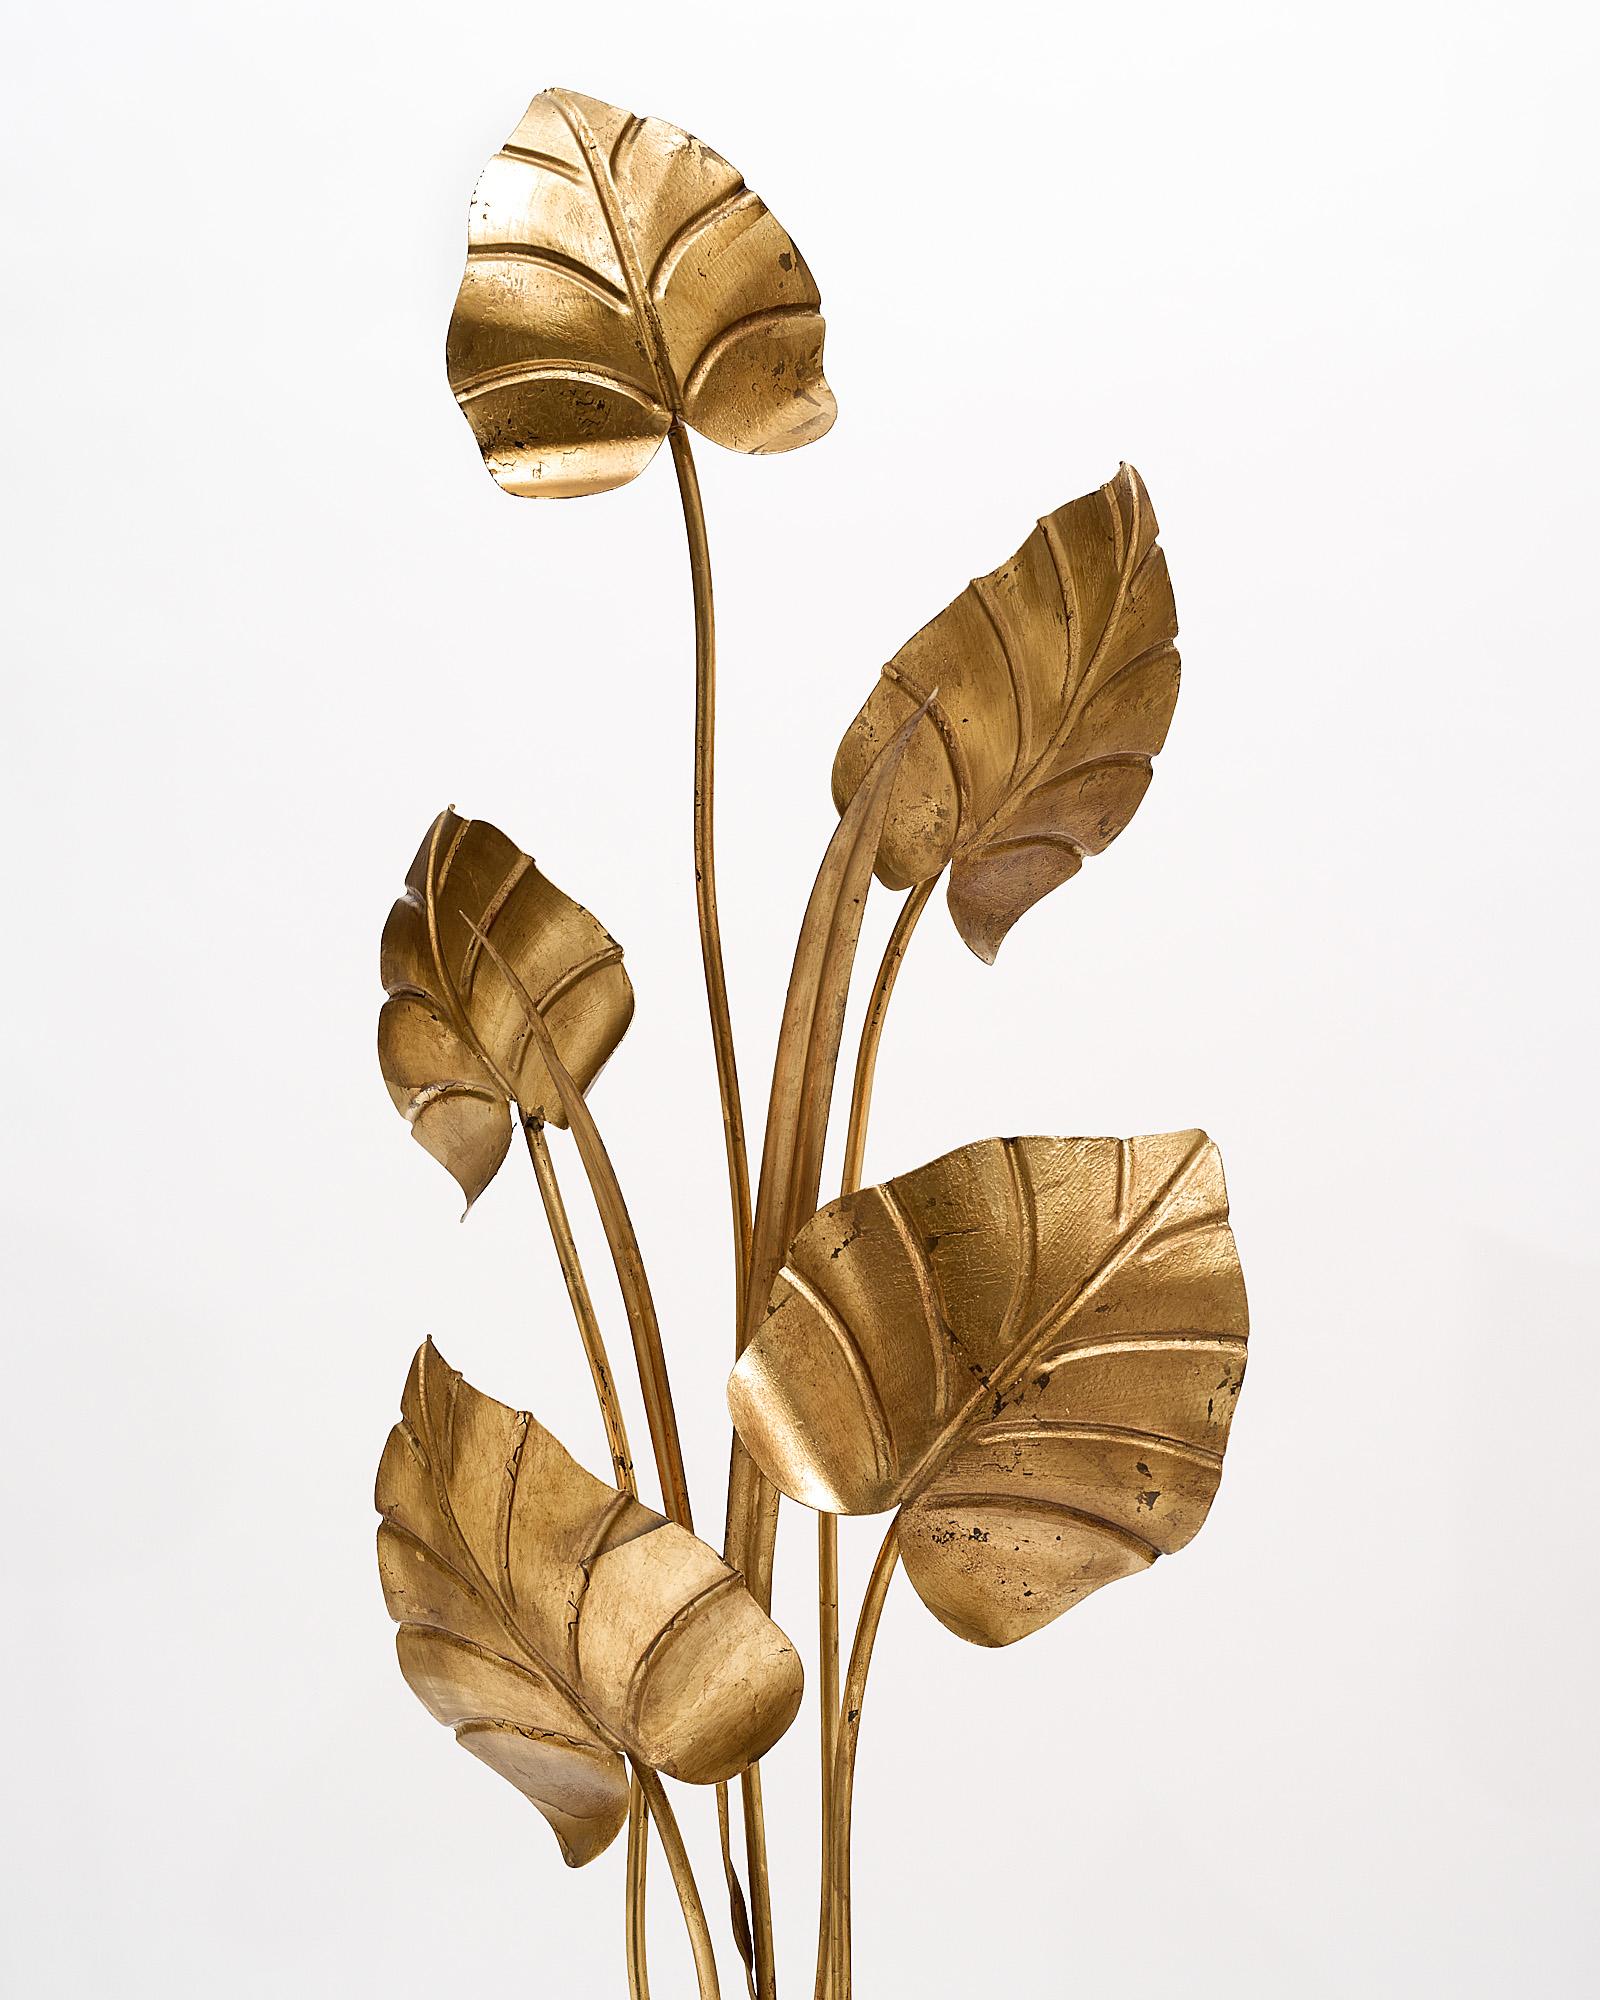 Floor lamp, French, made of gold leafed and patinated tole and featuring exotic foliage. This light has been newly wired to fit US standards.